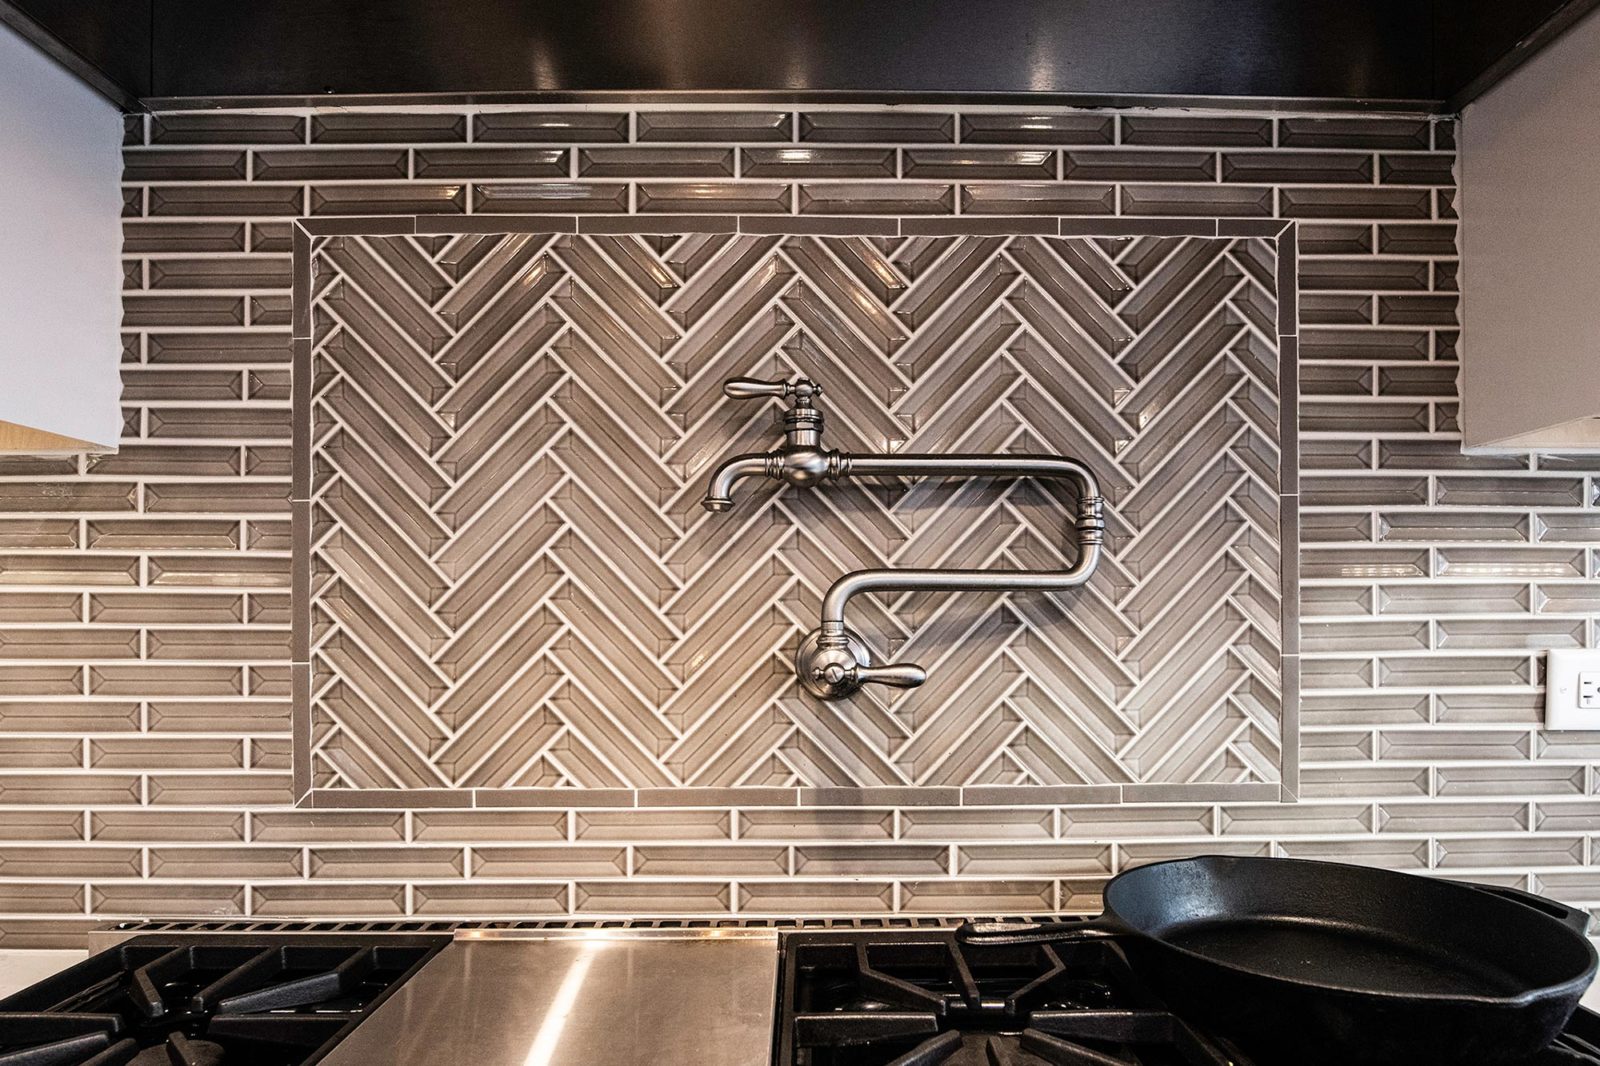 LivCo kitchen renovation tiled backsplash with over stove faucet stainless steel